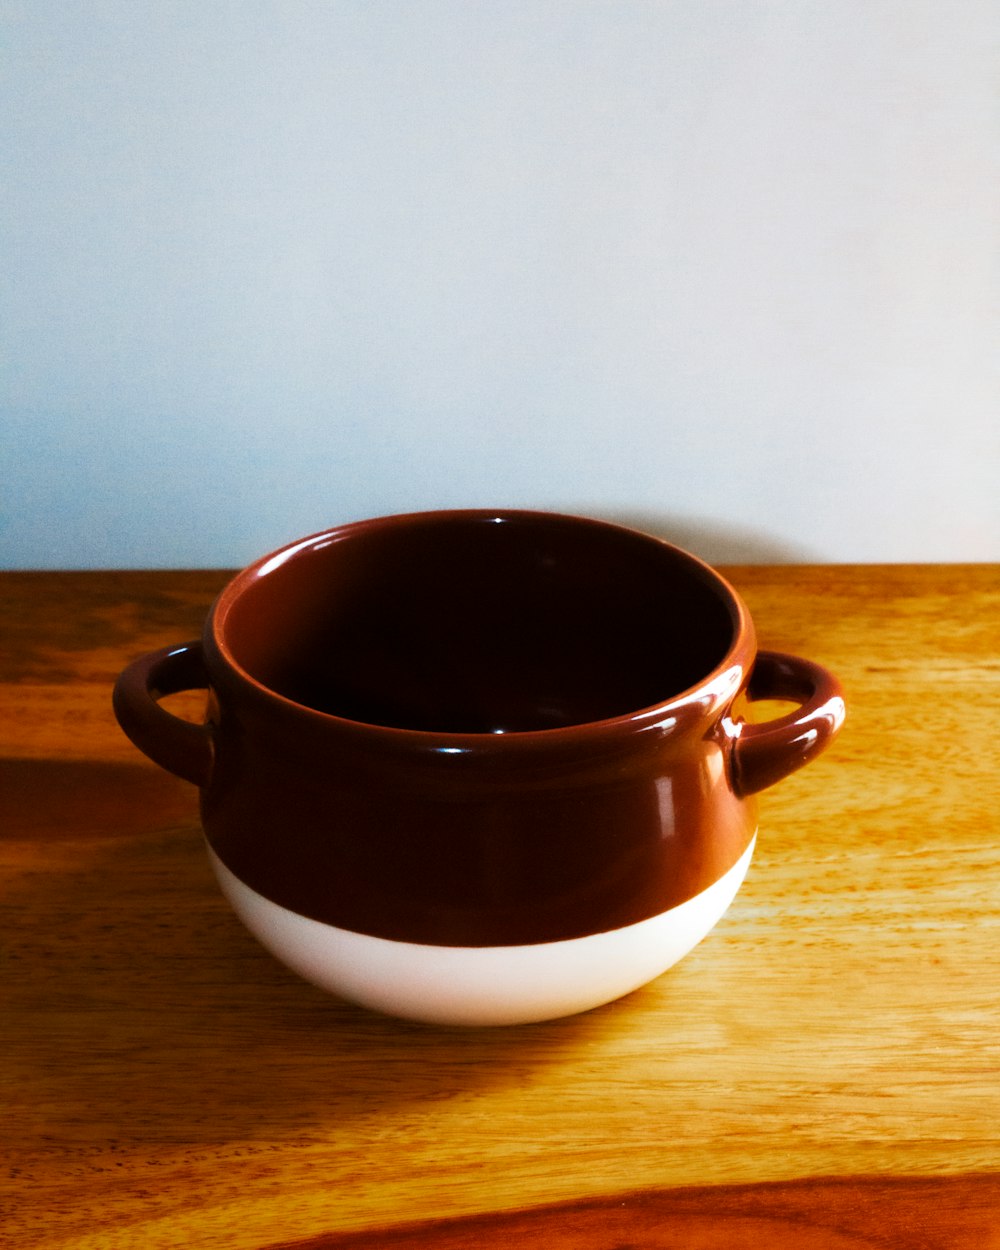 a brown and white bowl sitting on top of a wooden table